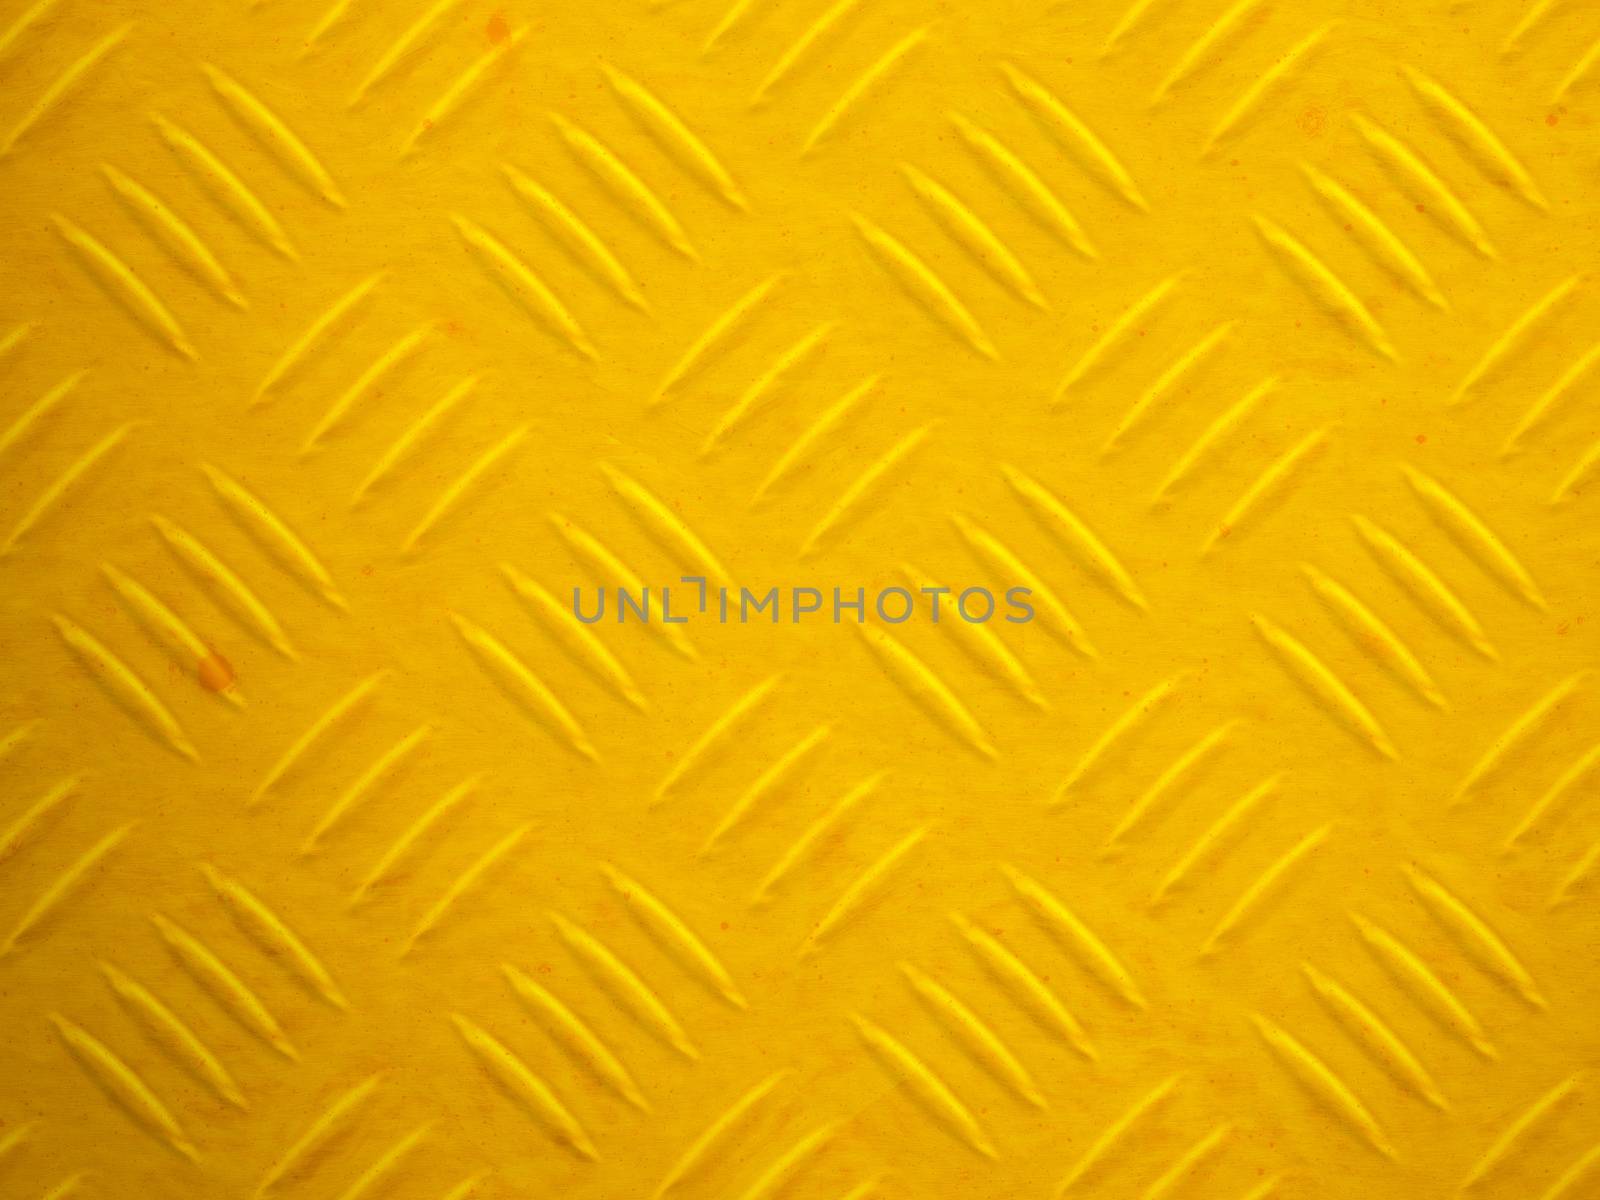 Illustration of a yellow painted diamond metal plate texture